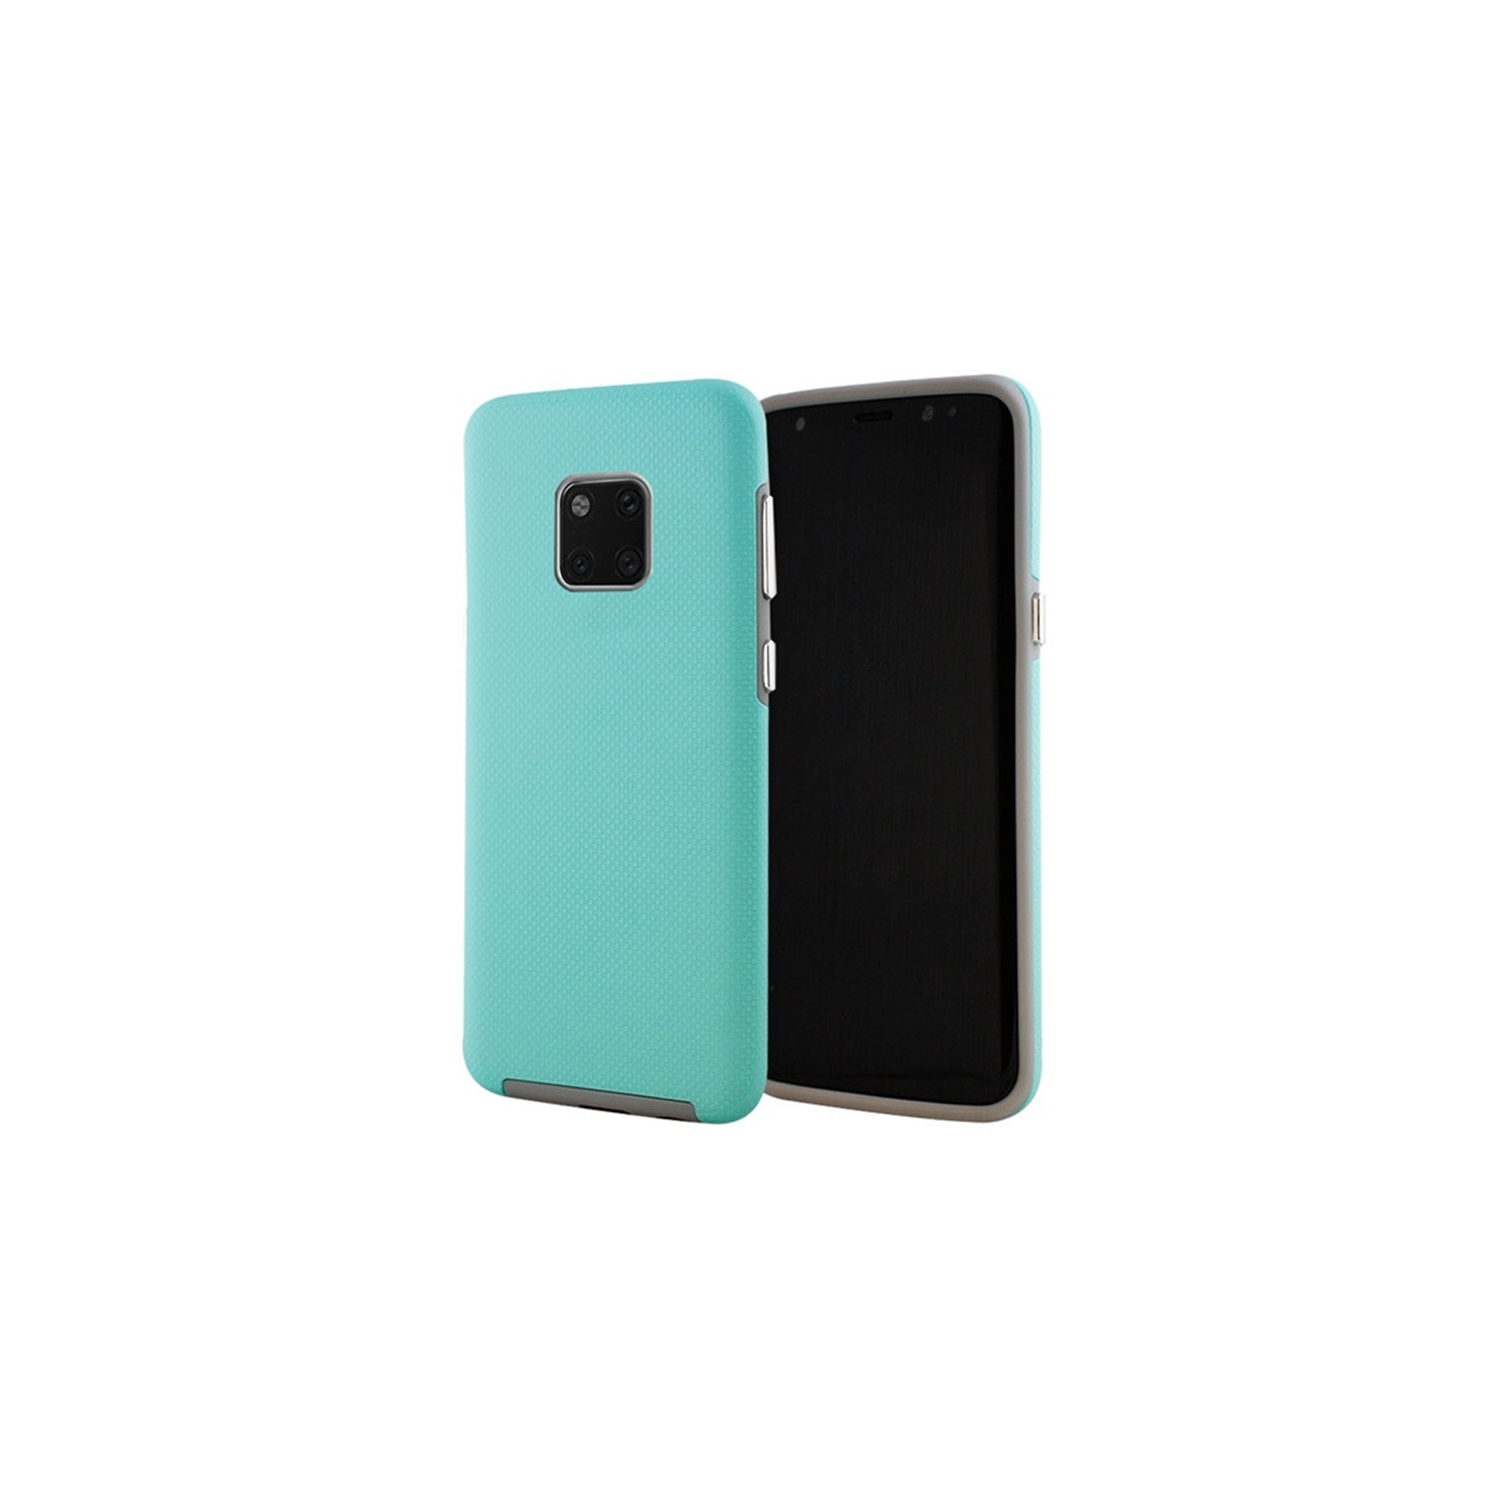 【CSmart】 Slim Fitted Hybrid Hard PC Shell Shockproof Scratch Resistant Case Cover for Huawei Mate 20 Pro, Mint